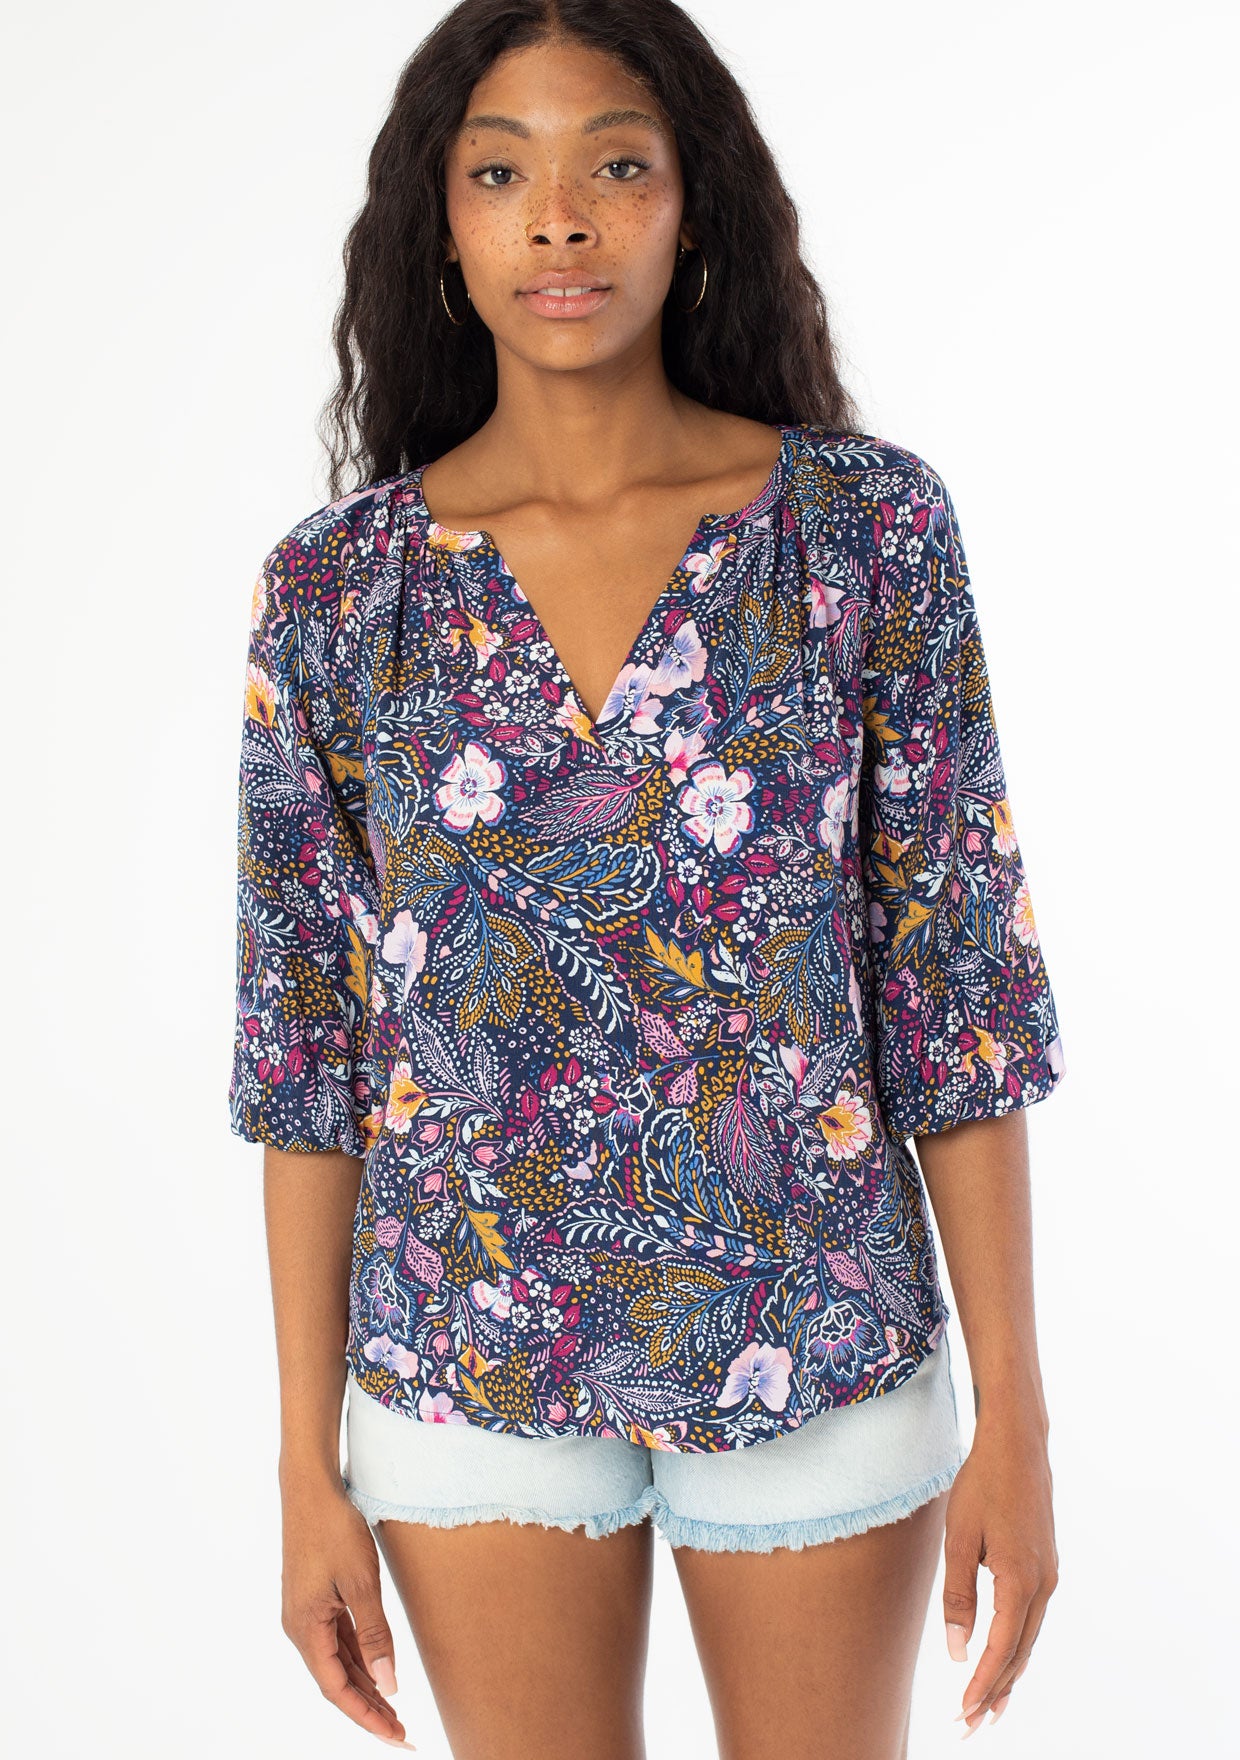 Just You Wait Navy Blue Floral Top  Floral tops, Navy blue floral top,  Blue floral top